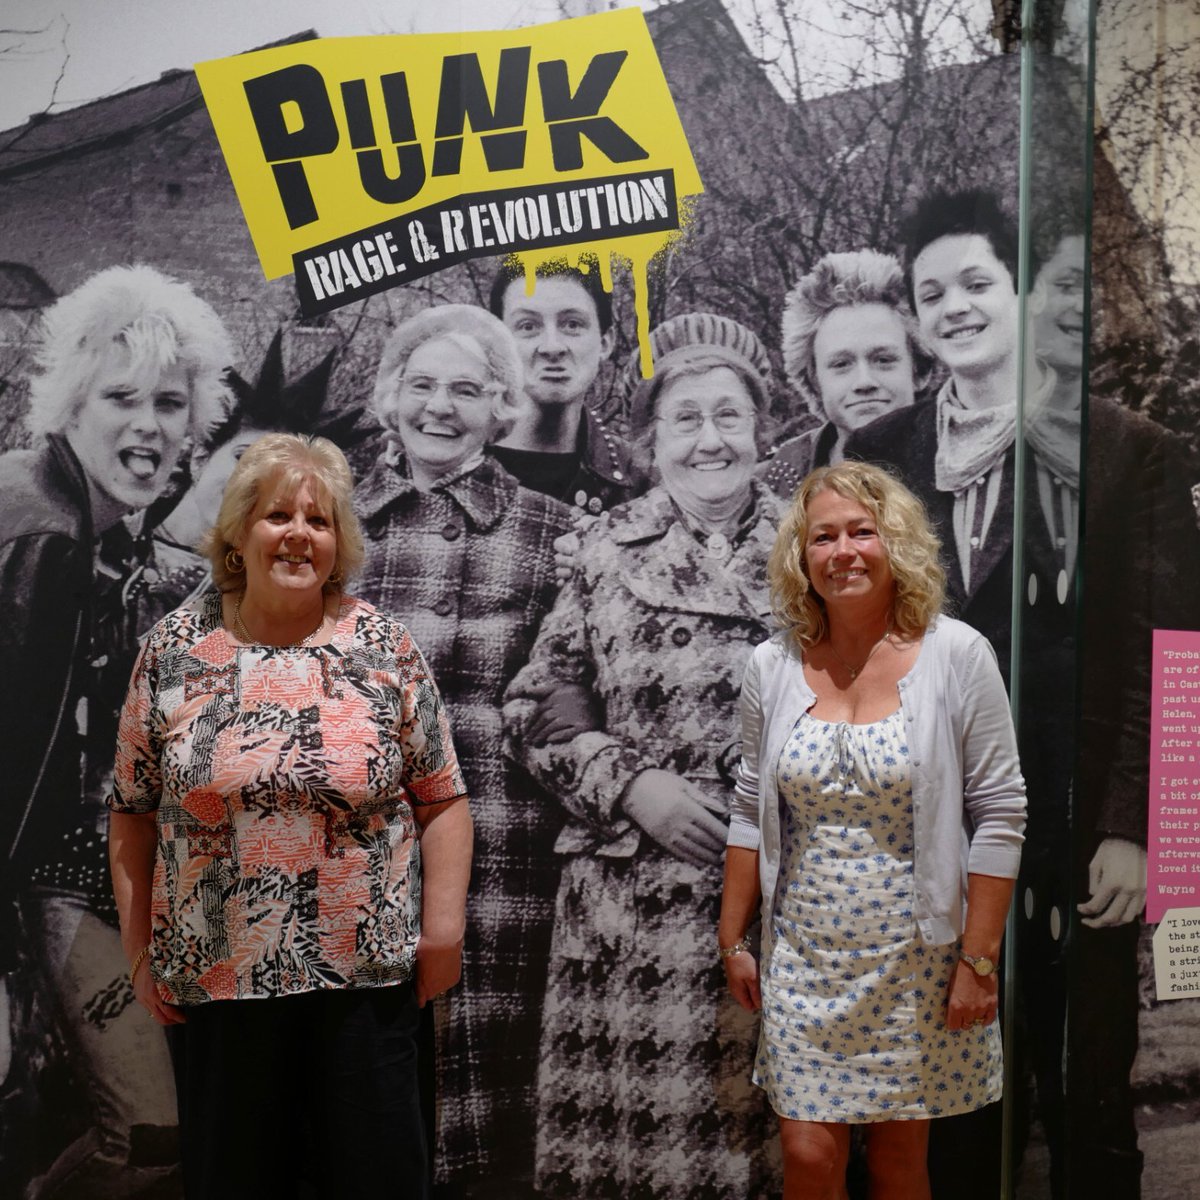 Just ONE WEEK to vote for the @heritagefunduk Project of the Year award, use #NLAPunk on Facebook, Twitter and Instagram today to cast your vote 📷and follow the link below too, everyone gets 4 votes total! @LottoGoodCauses #yourvotecounts #communityprojects #punksnotdead